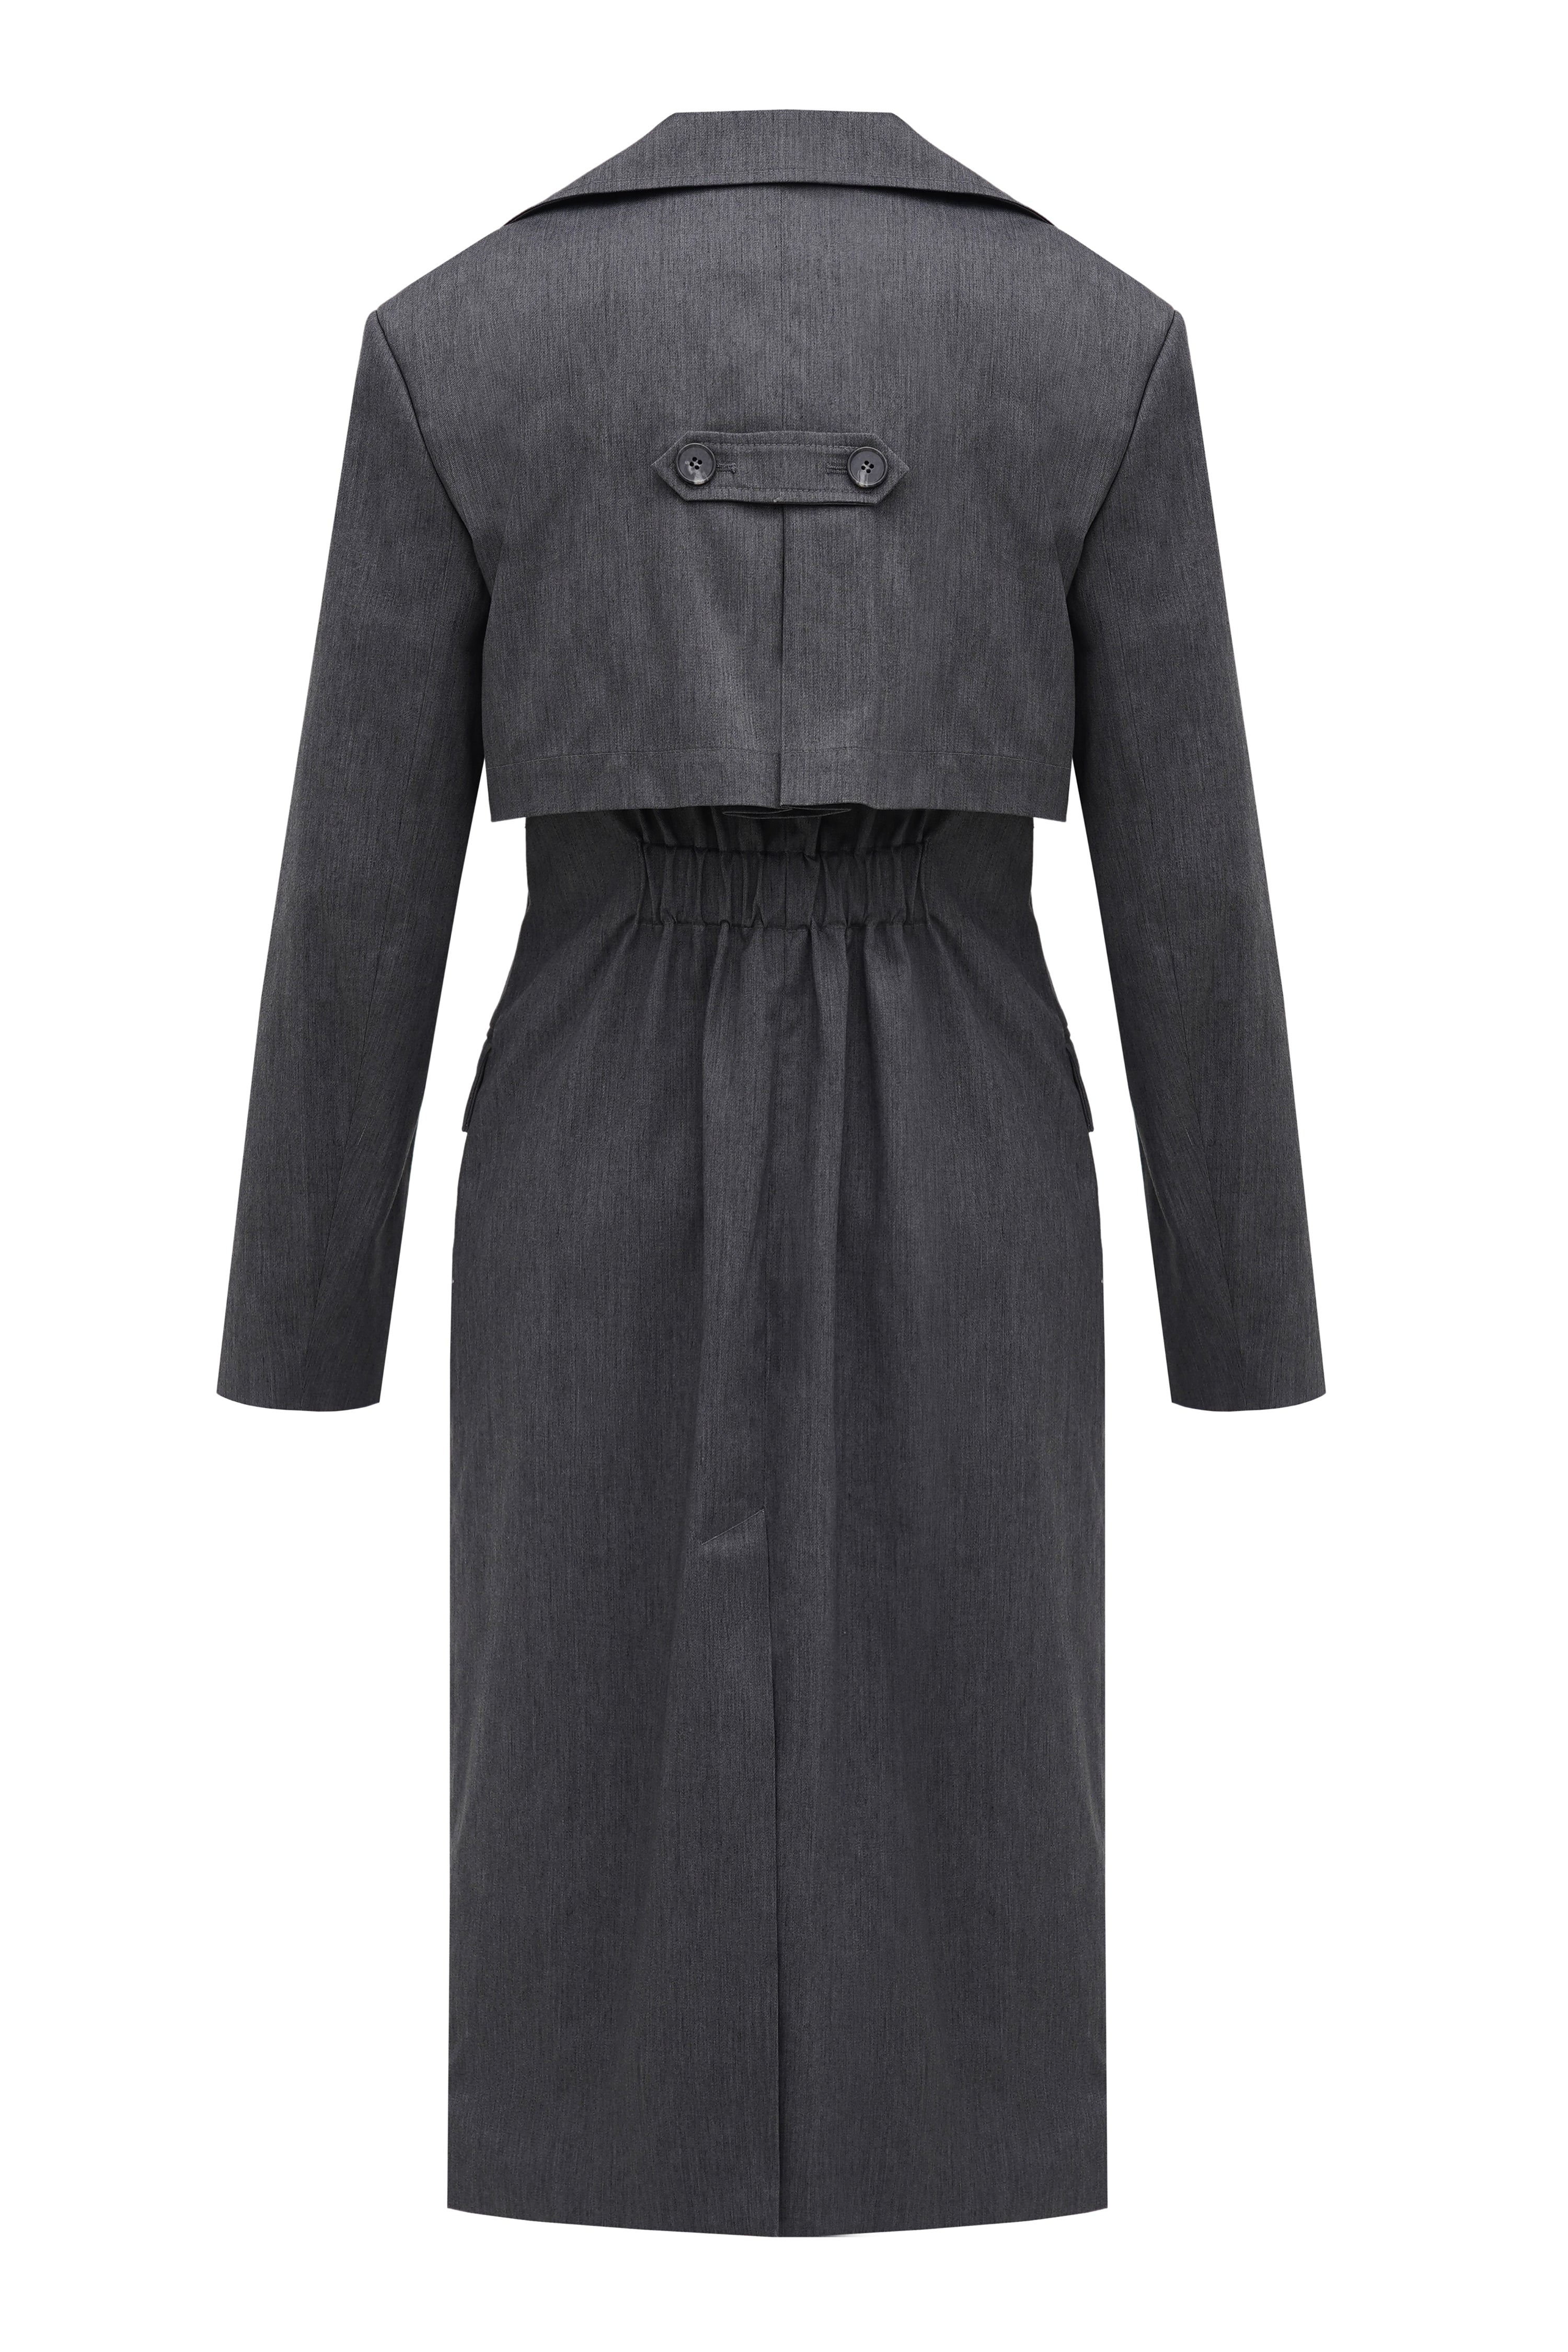 A back of a grey trench coat created from recycled polyester with an elastic detail on a waist